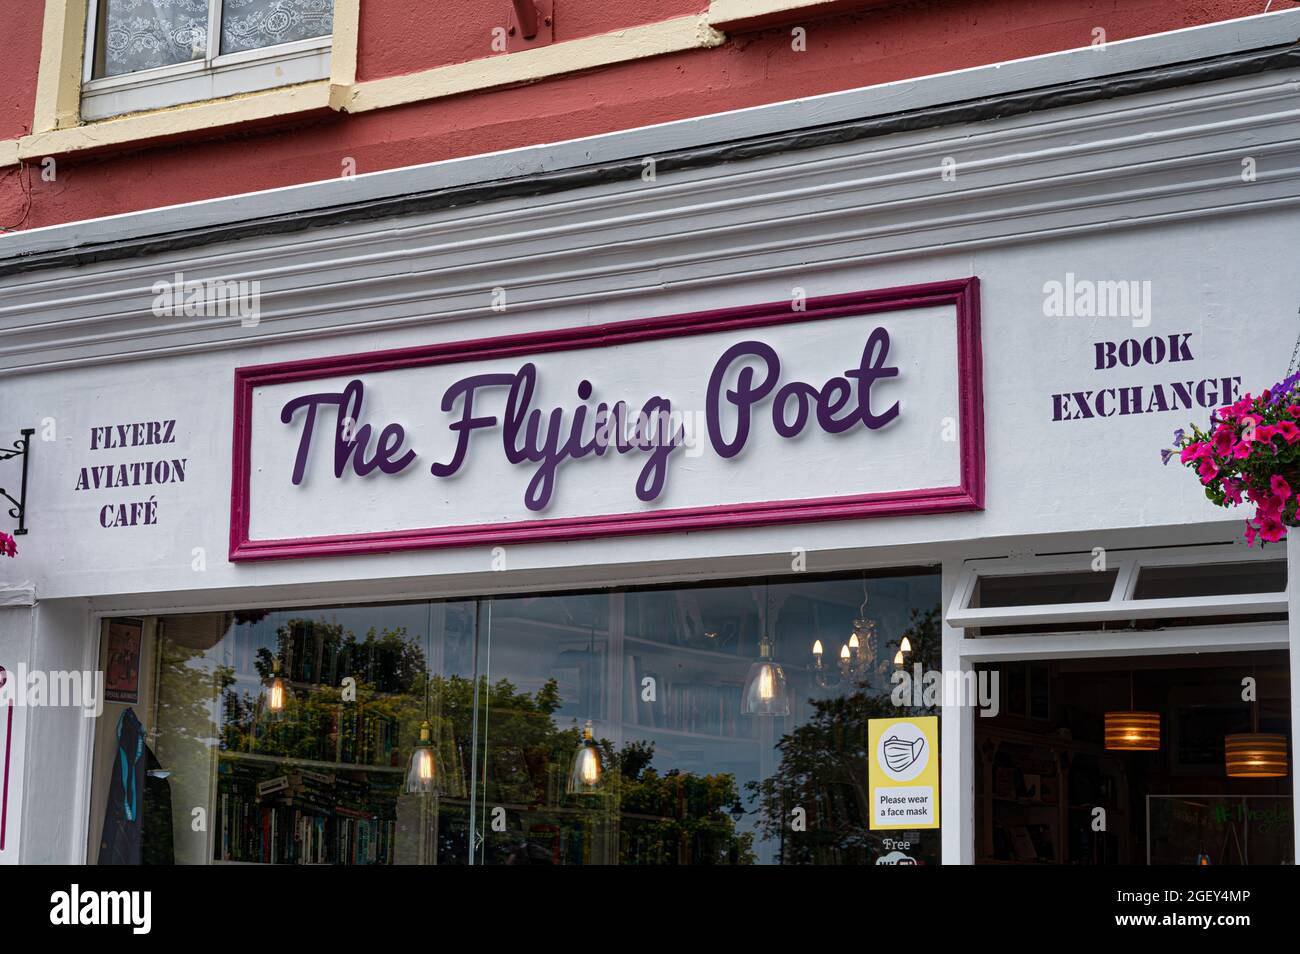 Kinsale, Ireland- July 13, 2021: The sign for The Flying Poet shop in Kinsale Stock Photo